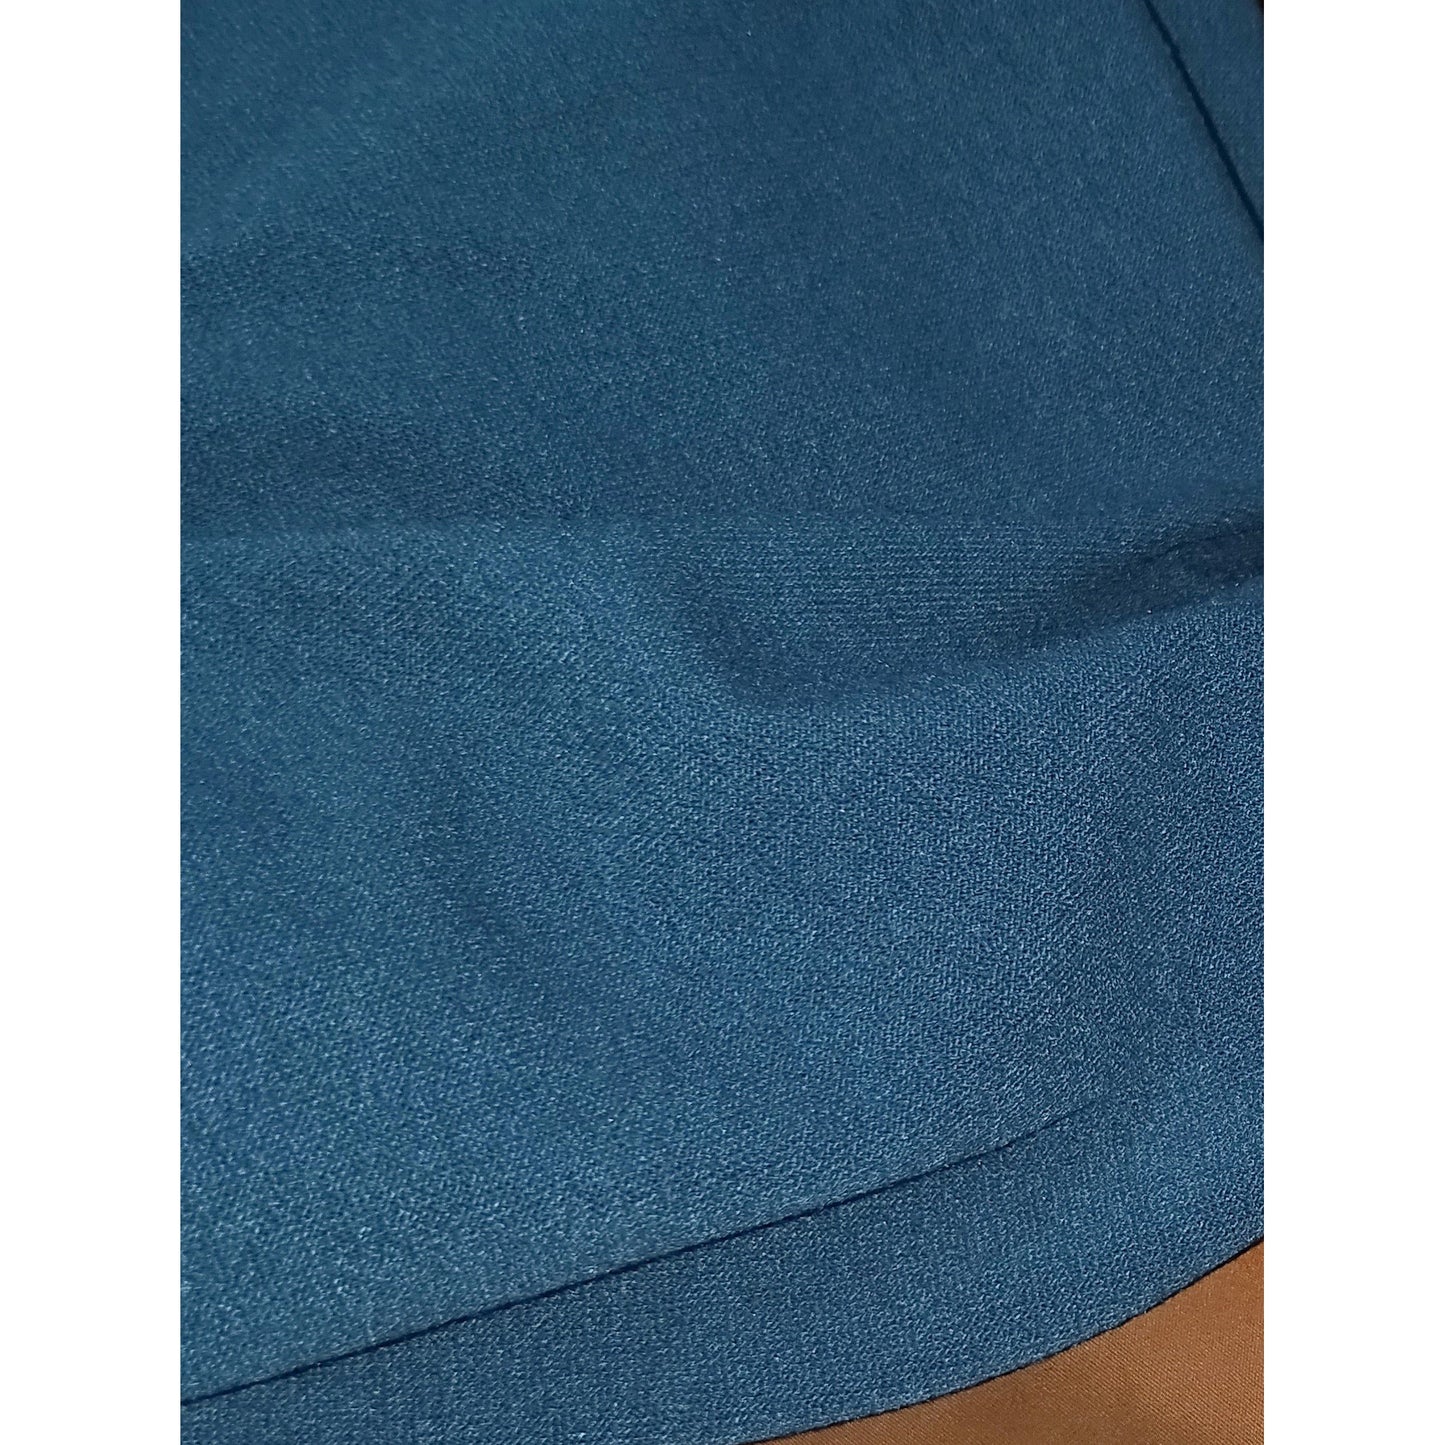 polyester/spandex  knit fabric - teal